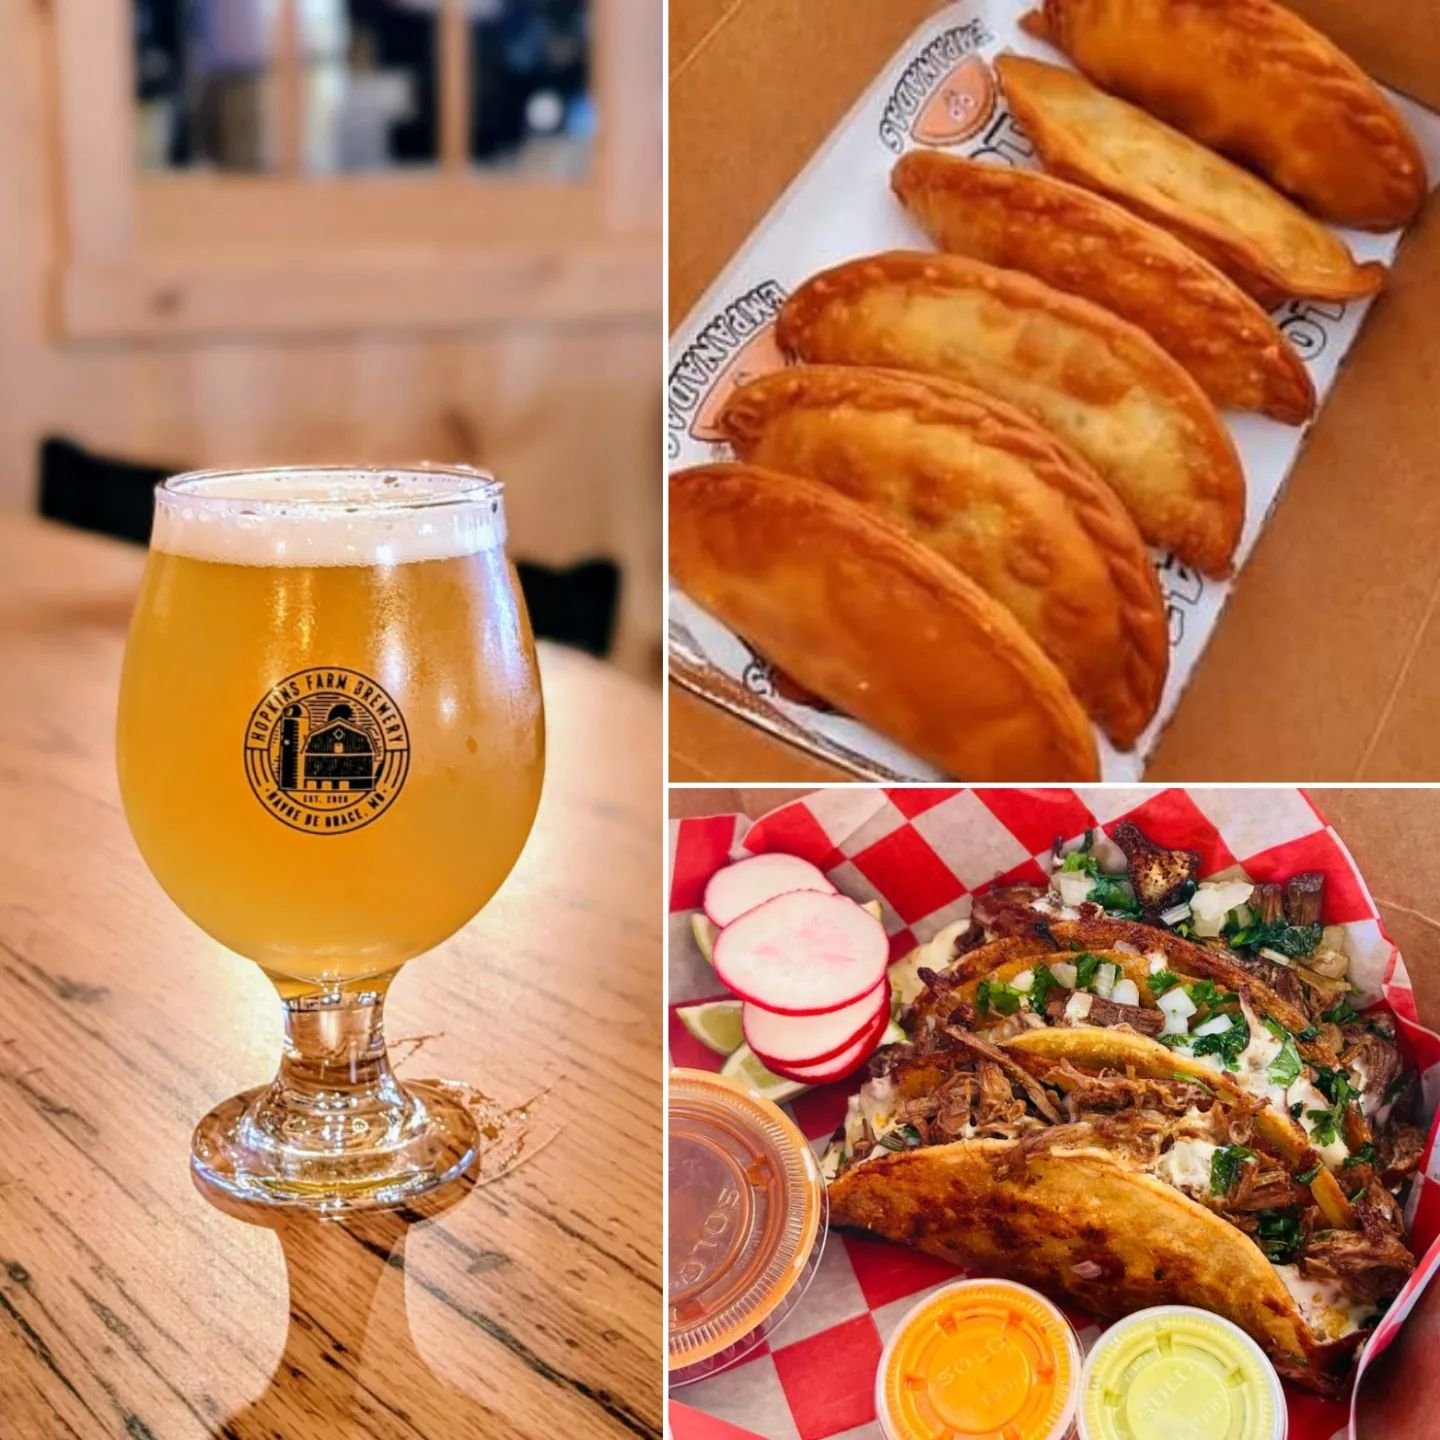 Unfortunately due to the weather, the vendors, DJ, and salsa lessons have been cancelled.

But we'll still have two awesome food trucks, @410empanadas and @dmv_taqueria, live music with @folkin_craic in the taproom from 2PM-6PM, festive music at 6PM,